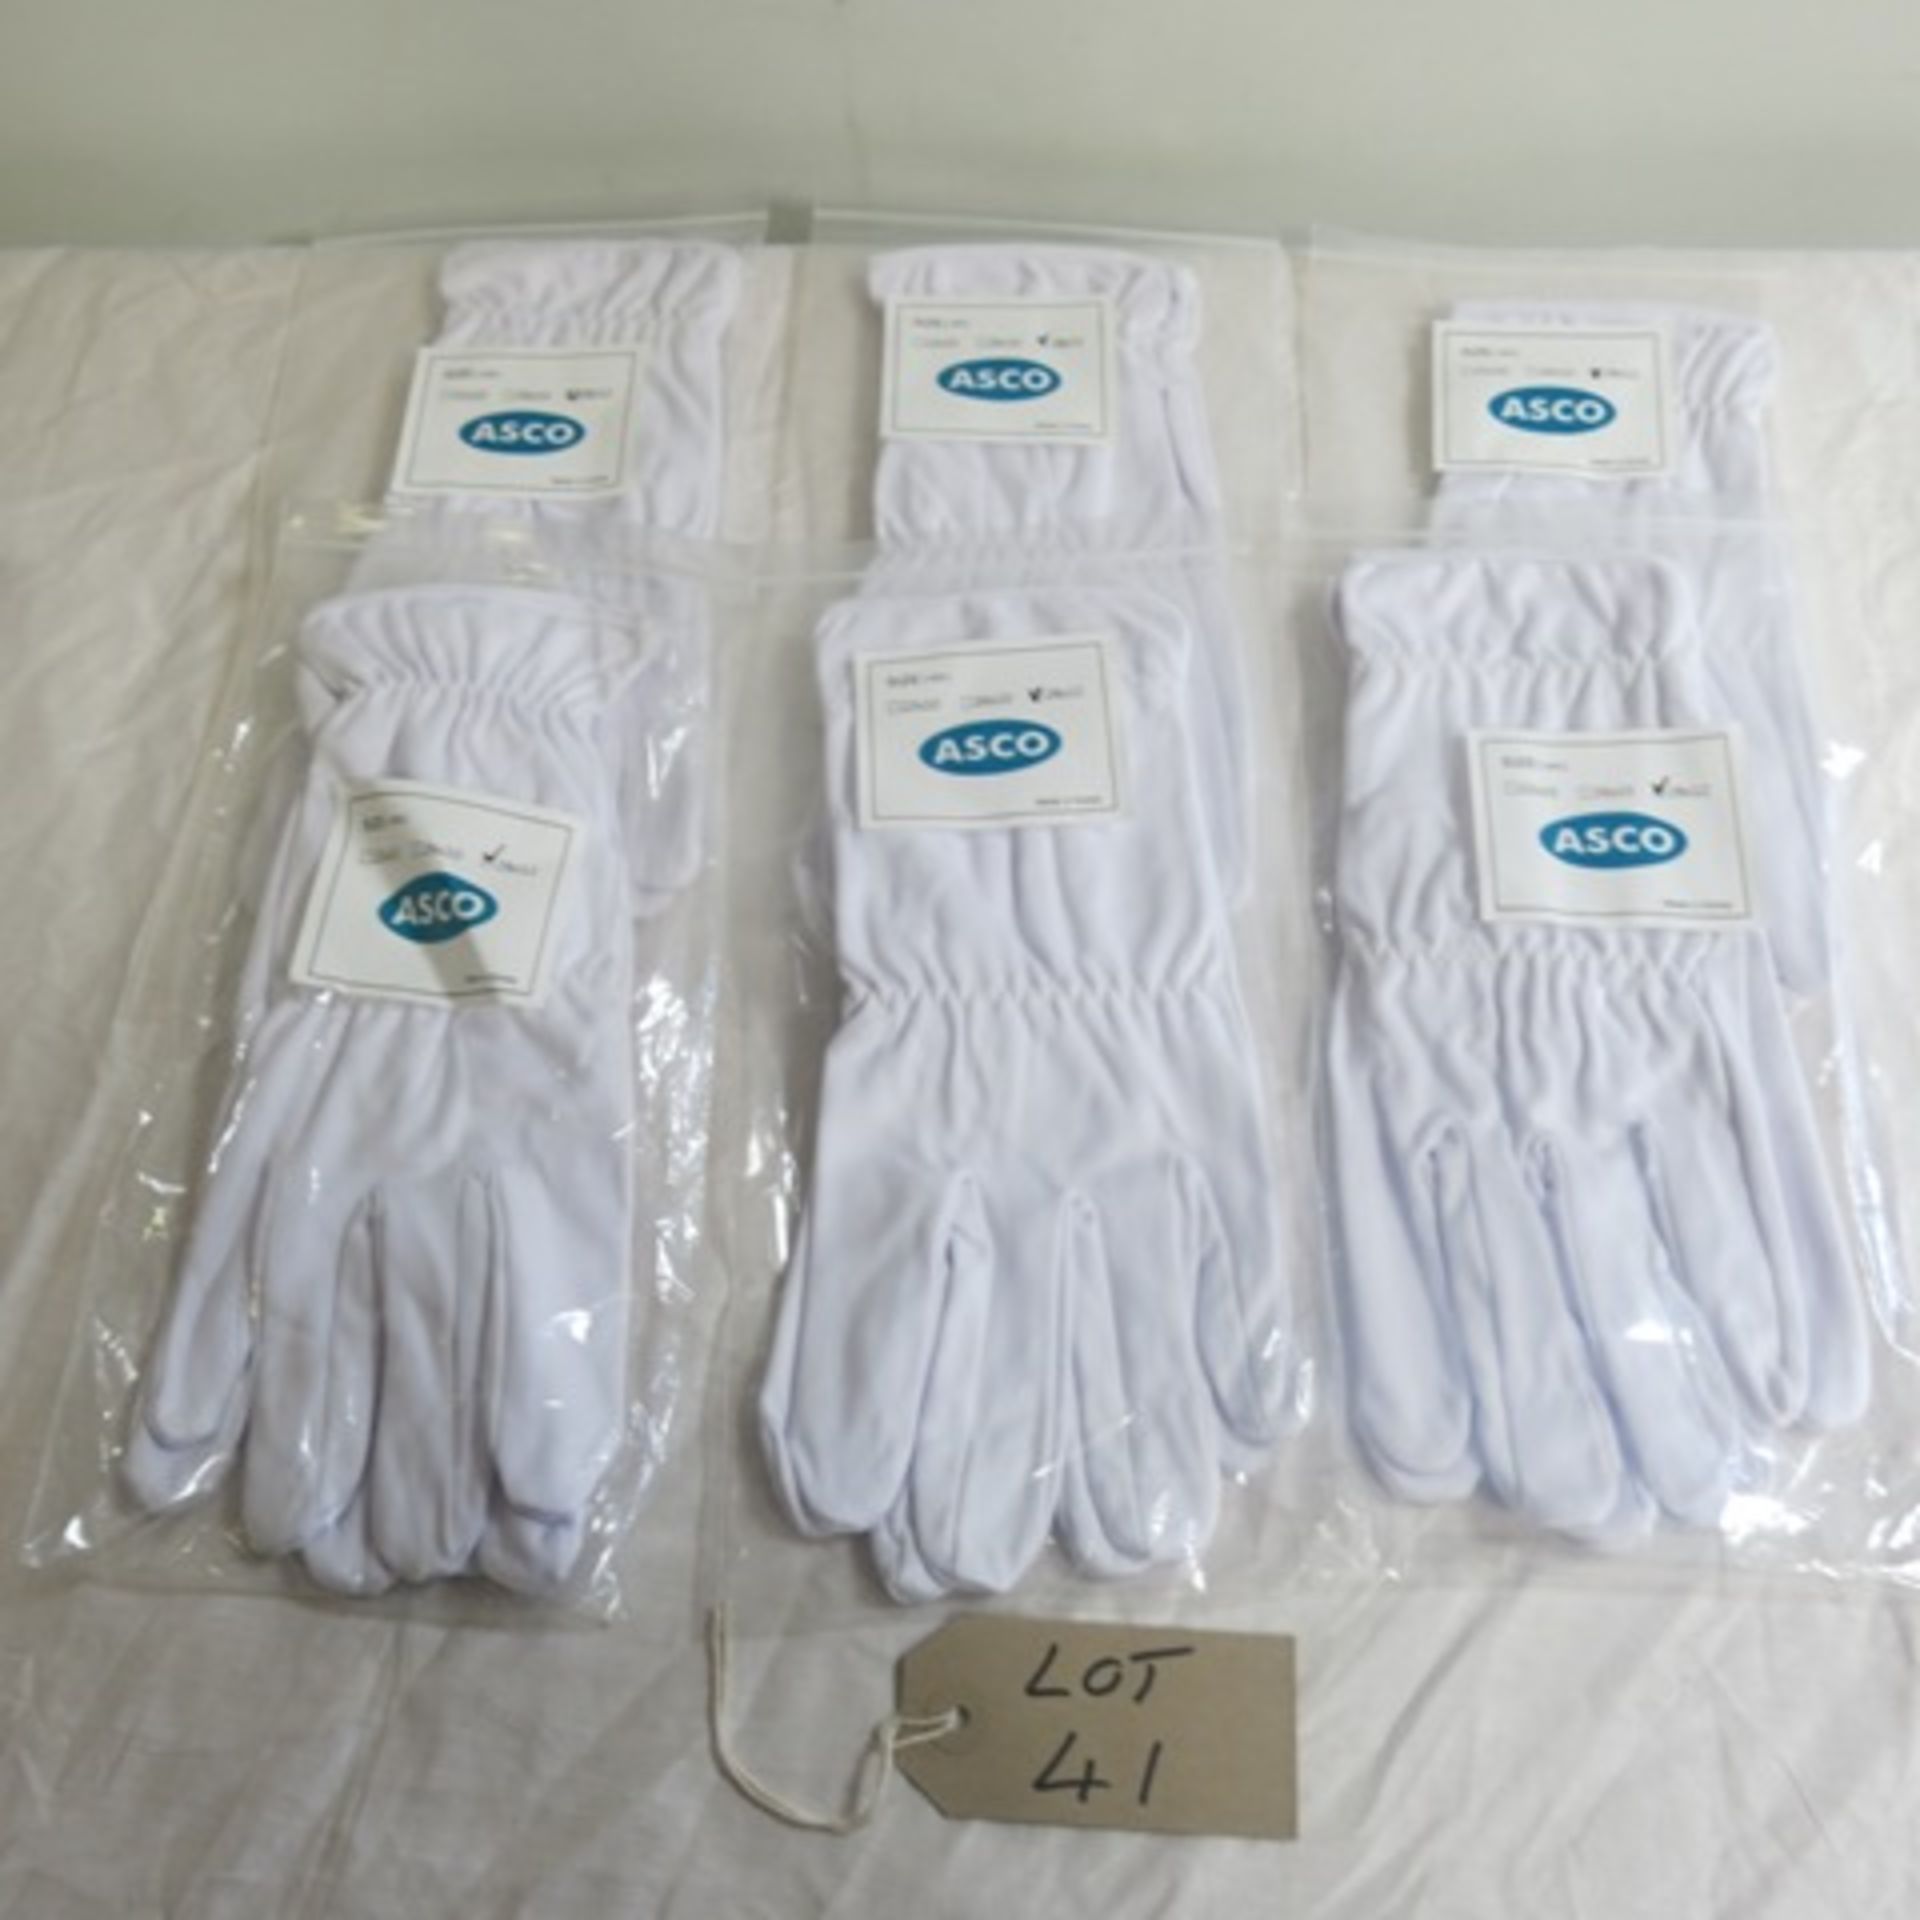 6 x New/Packaged Pairs or Asco Handling Gloves. Size 28 x 12cm.